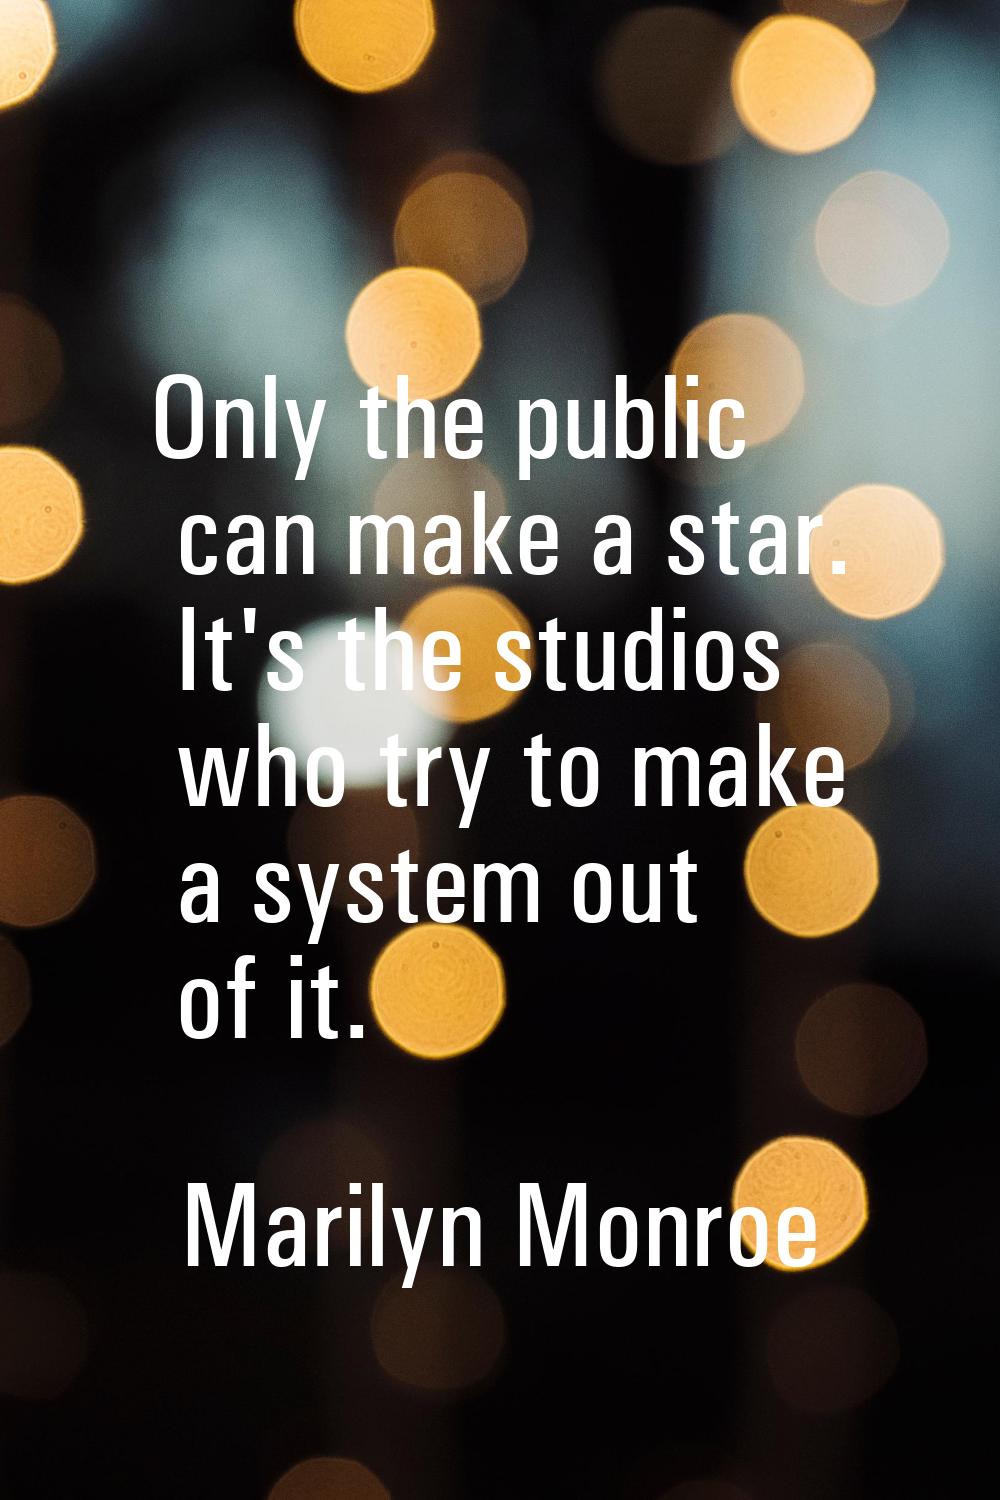 Only the public can make a star. It's the studios who try to make a system out of it.